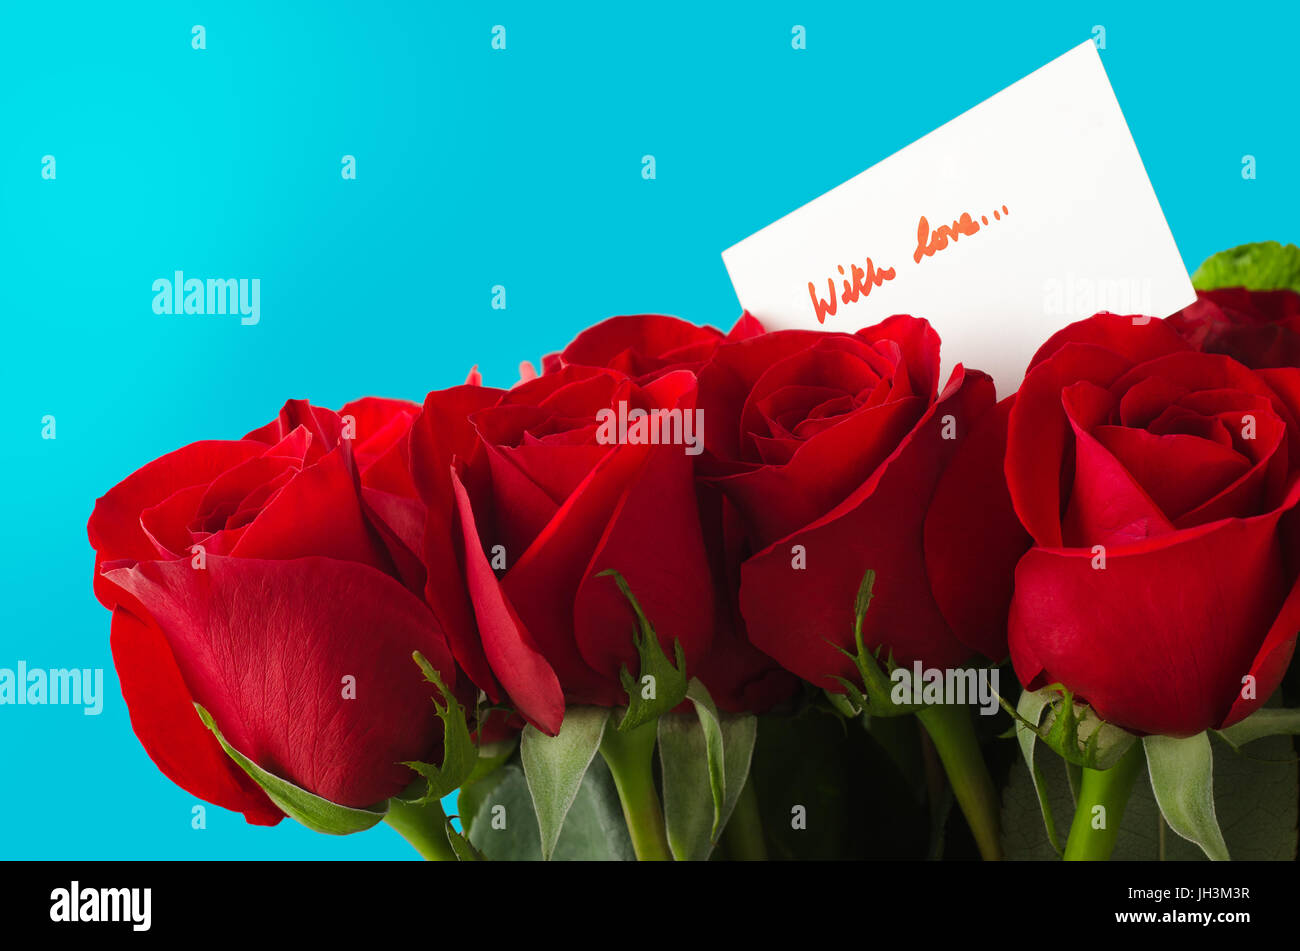 A bouquet of red roses against sky blue background.  A white message card shows 'With Love' in red handwriting. Stock Photo